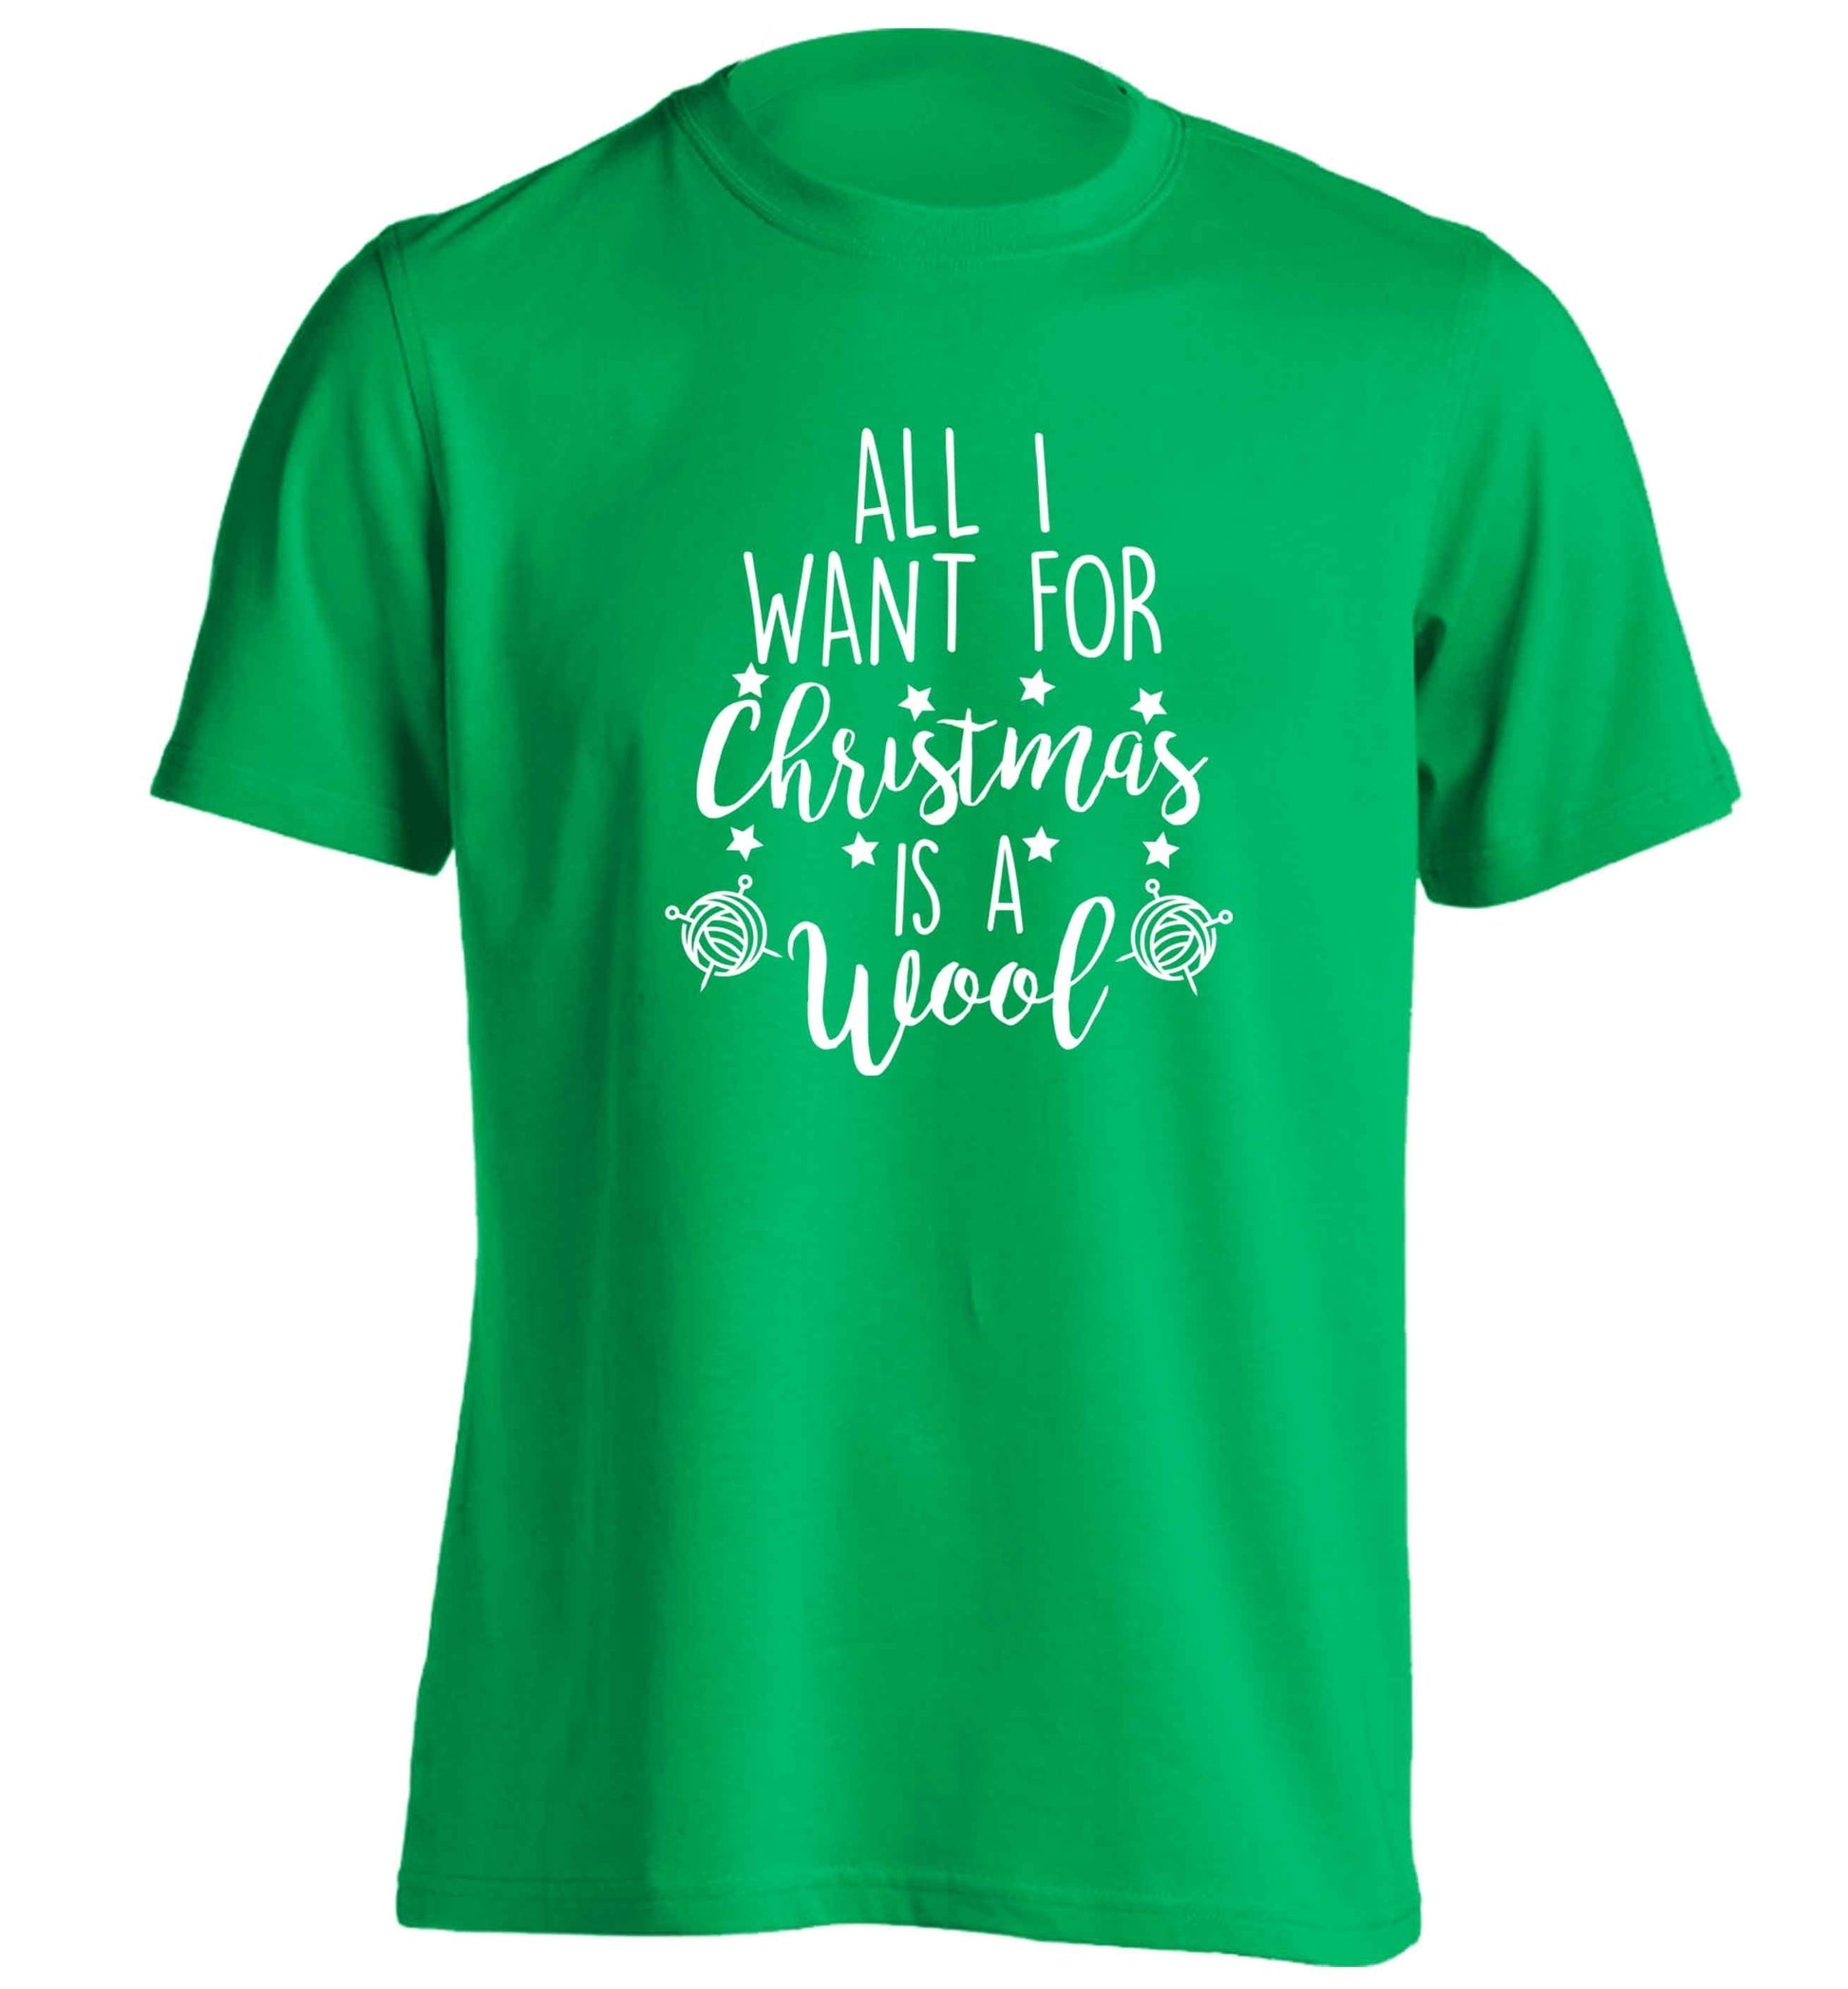 All I want for Christmas is wool! adults unisex green Tshirt 2XL